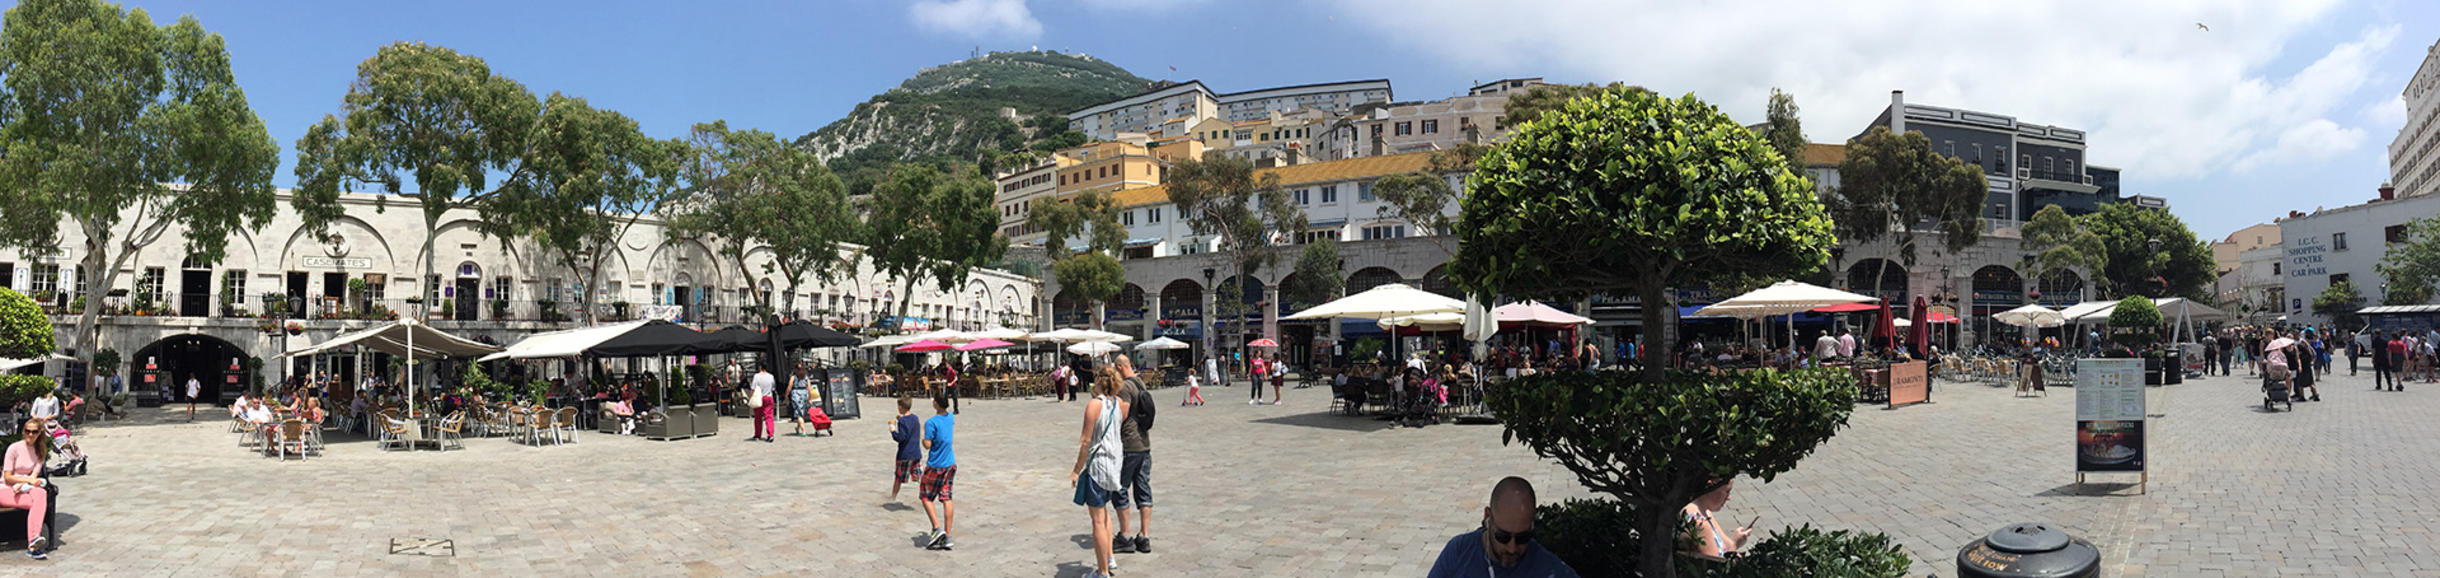 Photo of Casemate's Square in Gibraltar during the day time